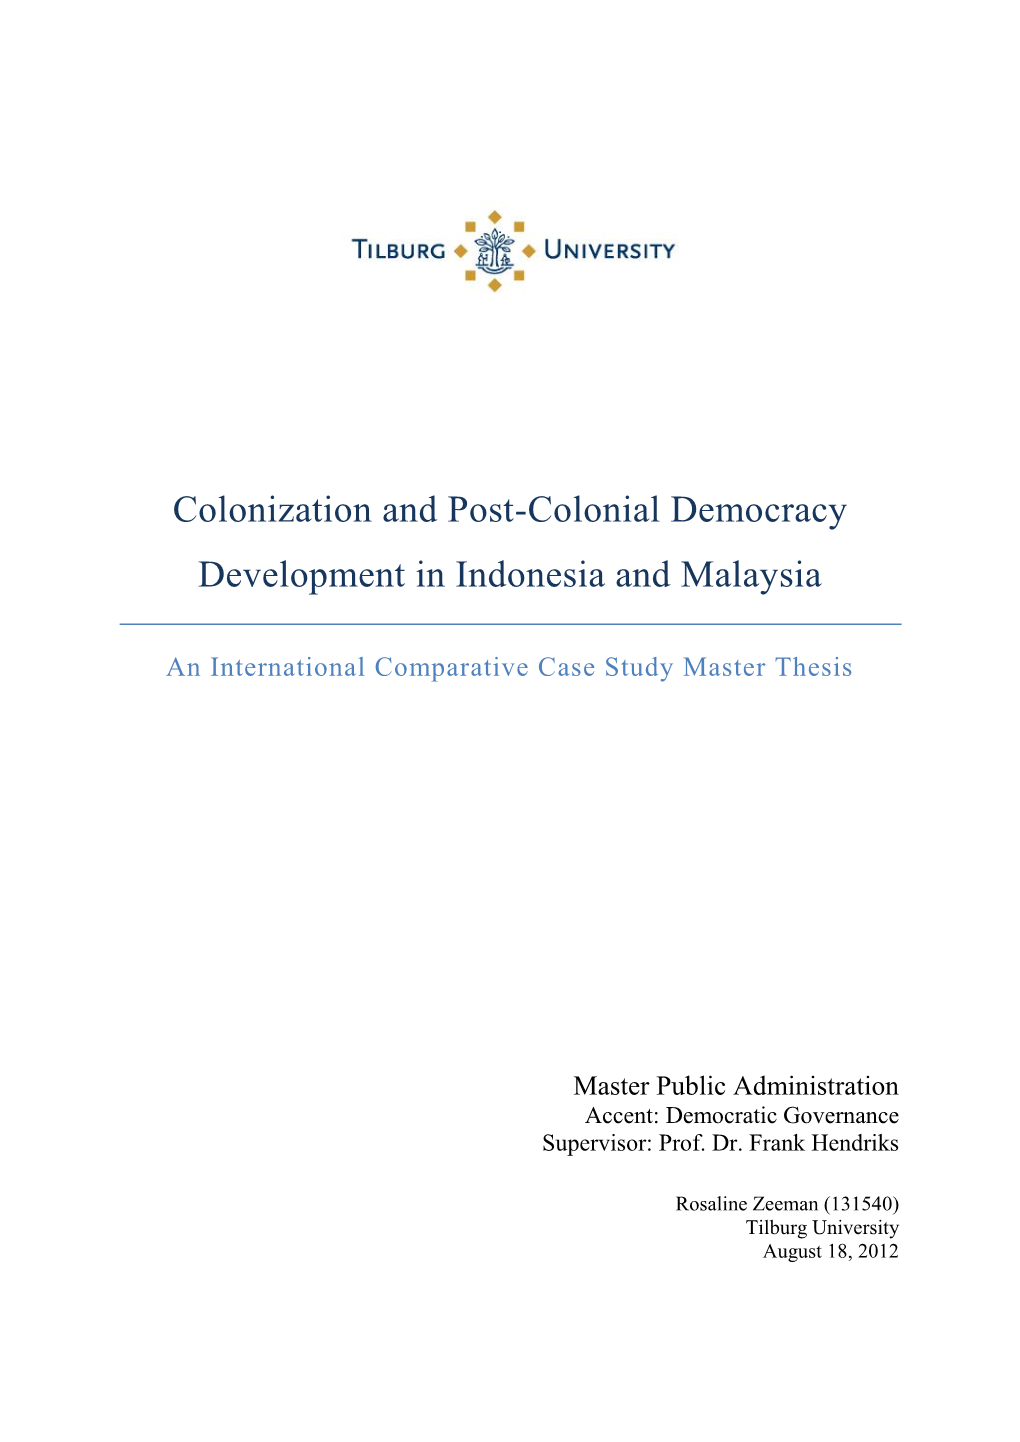 Colonization and Post-Colonial Democracy Development in Indonesia and Malaysia